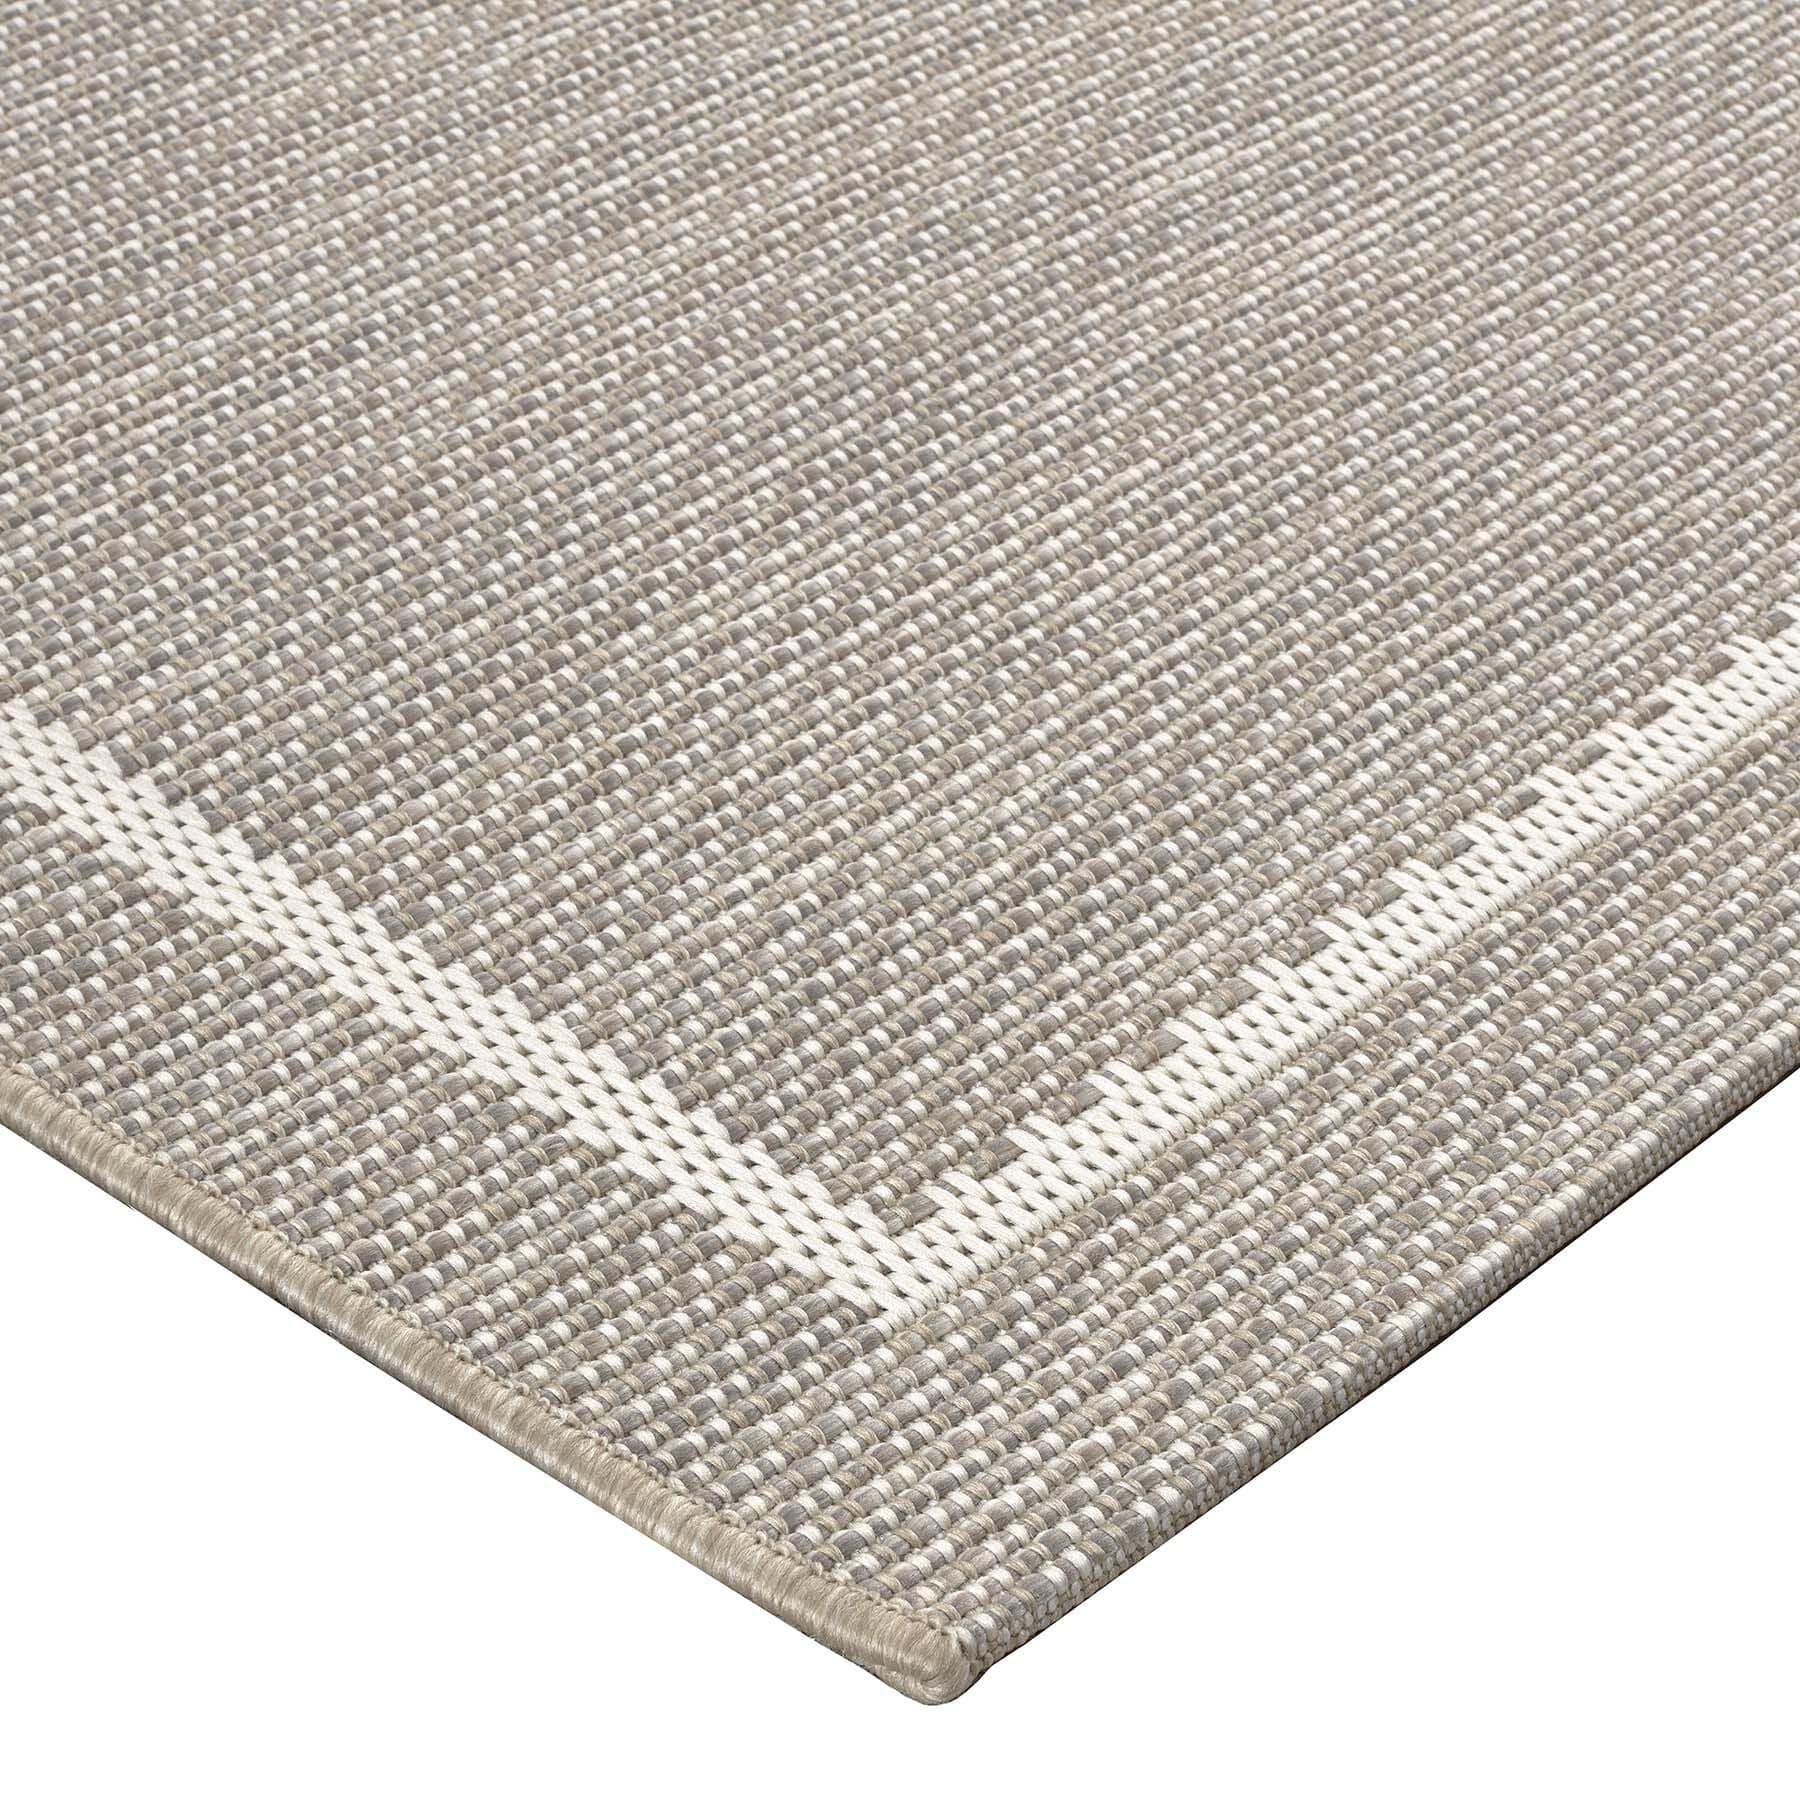 (E198) Honeybloom Prisma Ivory Border Indoor & Outdoor Area Rug, 8x10 - nybusiness